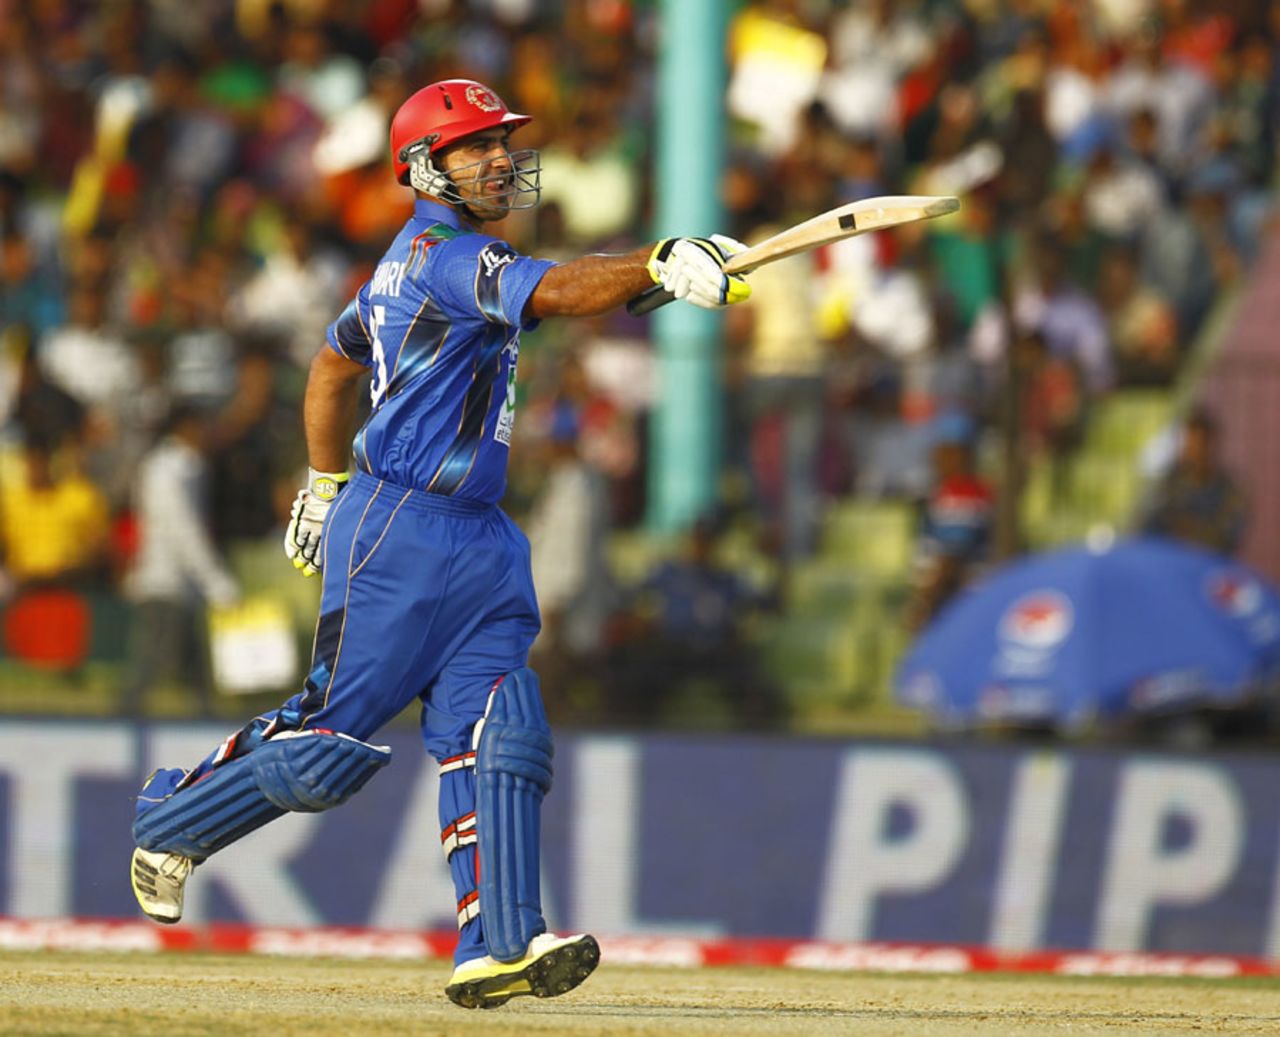 Samiullah Shenwari acknowledges the crowd after making fifty, Bangladesh v Afghanistan, Asia Cup, Fatullah, March 1, 2014